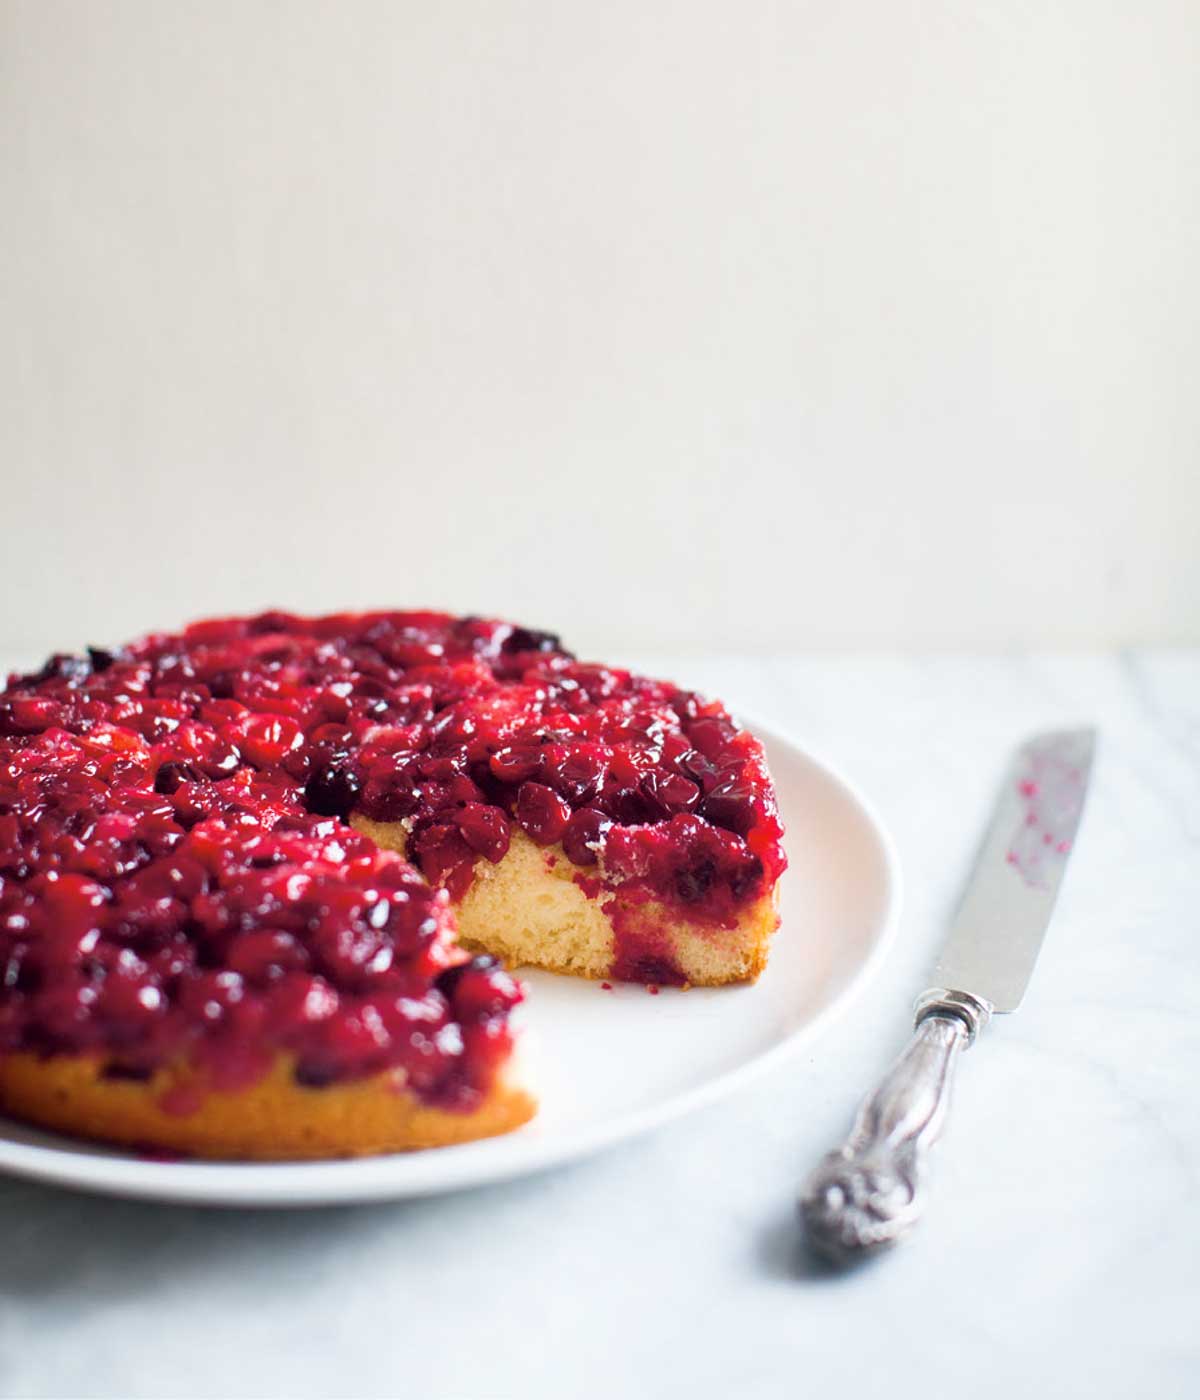 Cranberry upside-down cake with a large piece missing, on a white plate with a serving knife beside it.